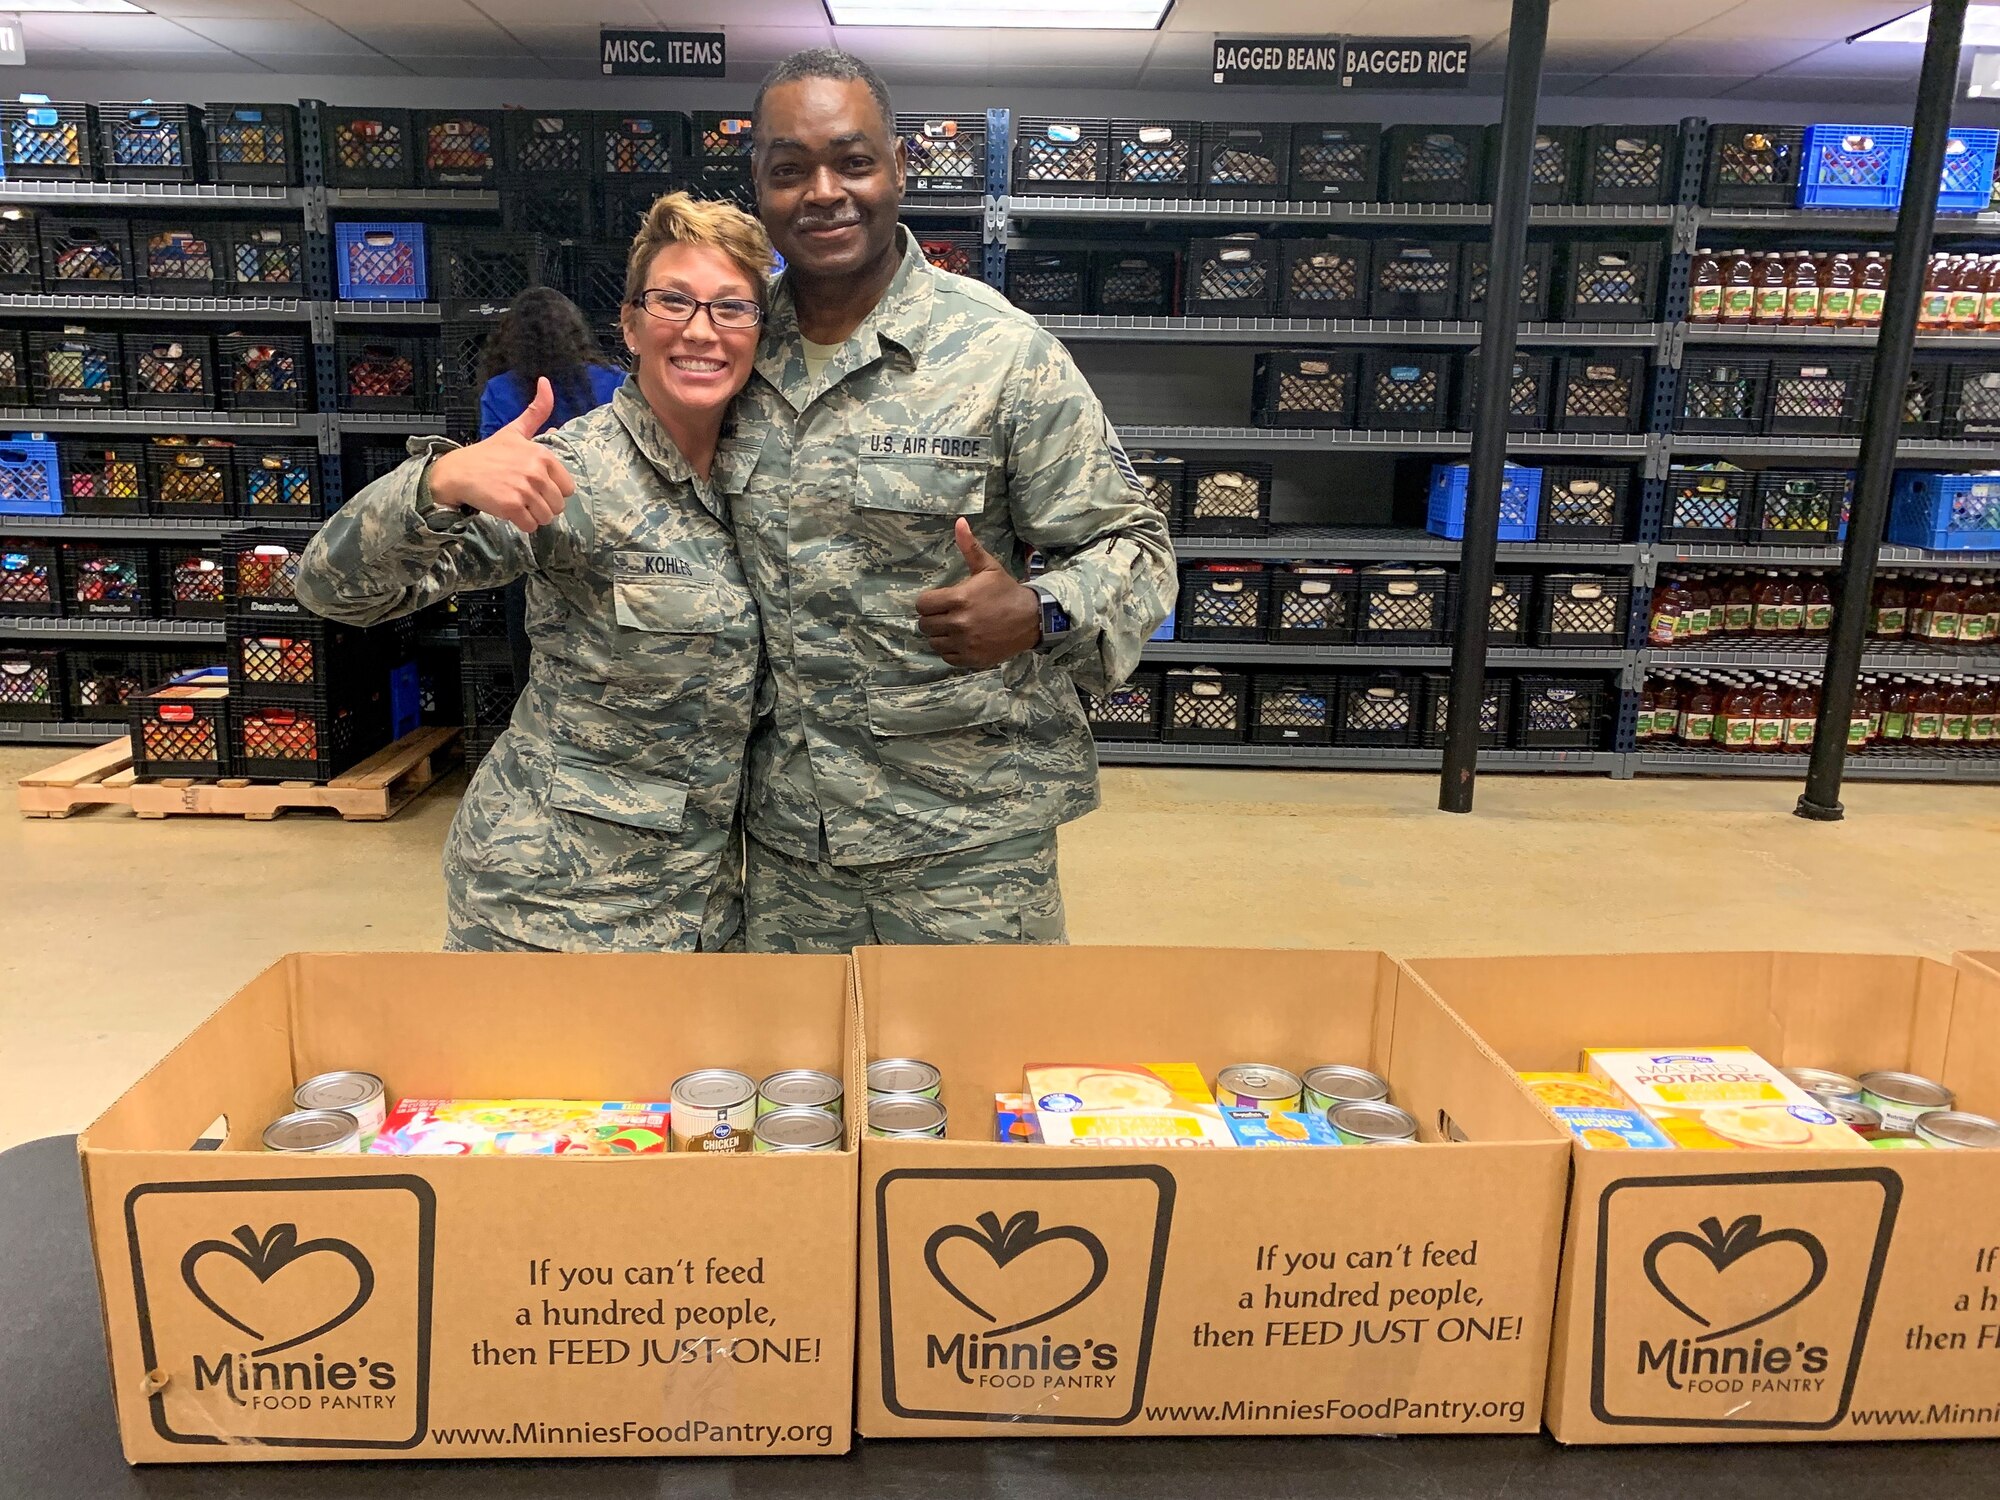 Senior Airman Leilani Kohles, assigned to the 136th Airlift Wing Air National Guard, and Master Sergeant Alan Shankle, assigned to the 301st Fighter Wing Maintenance Squadron, both from Naval Air Station Fort Worth Joint Reserve Base, Texas, pause after working hard with 20 other servicemembers who put together 500 meal packages to be delivered to veterans in need for the holiday season during the Hoops for Troops event November 5, 2019 at Minnie's Food Pantry in Plano, Texas.  Meal packages consisted of non-perishable food items and treats for the veterans to enjoy. (U.S. Air Force photo by Capt. Jessica Gross)